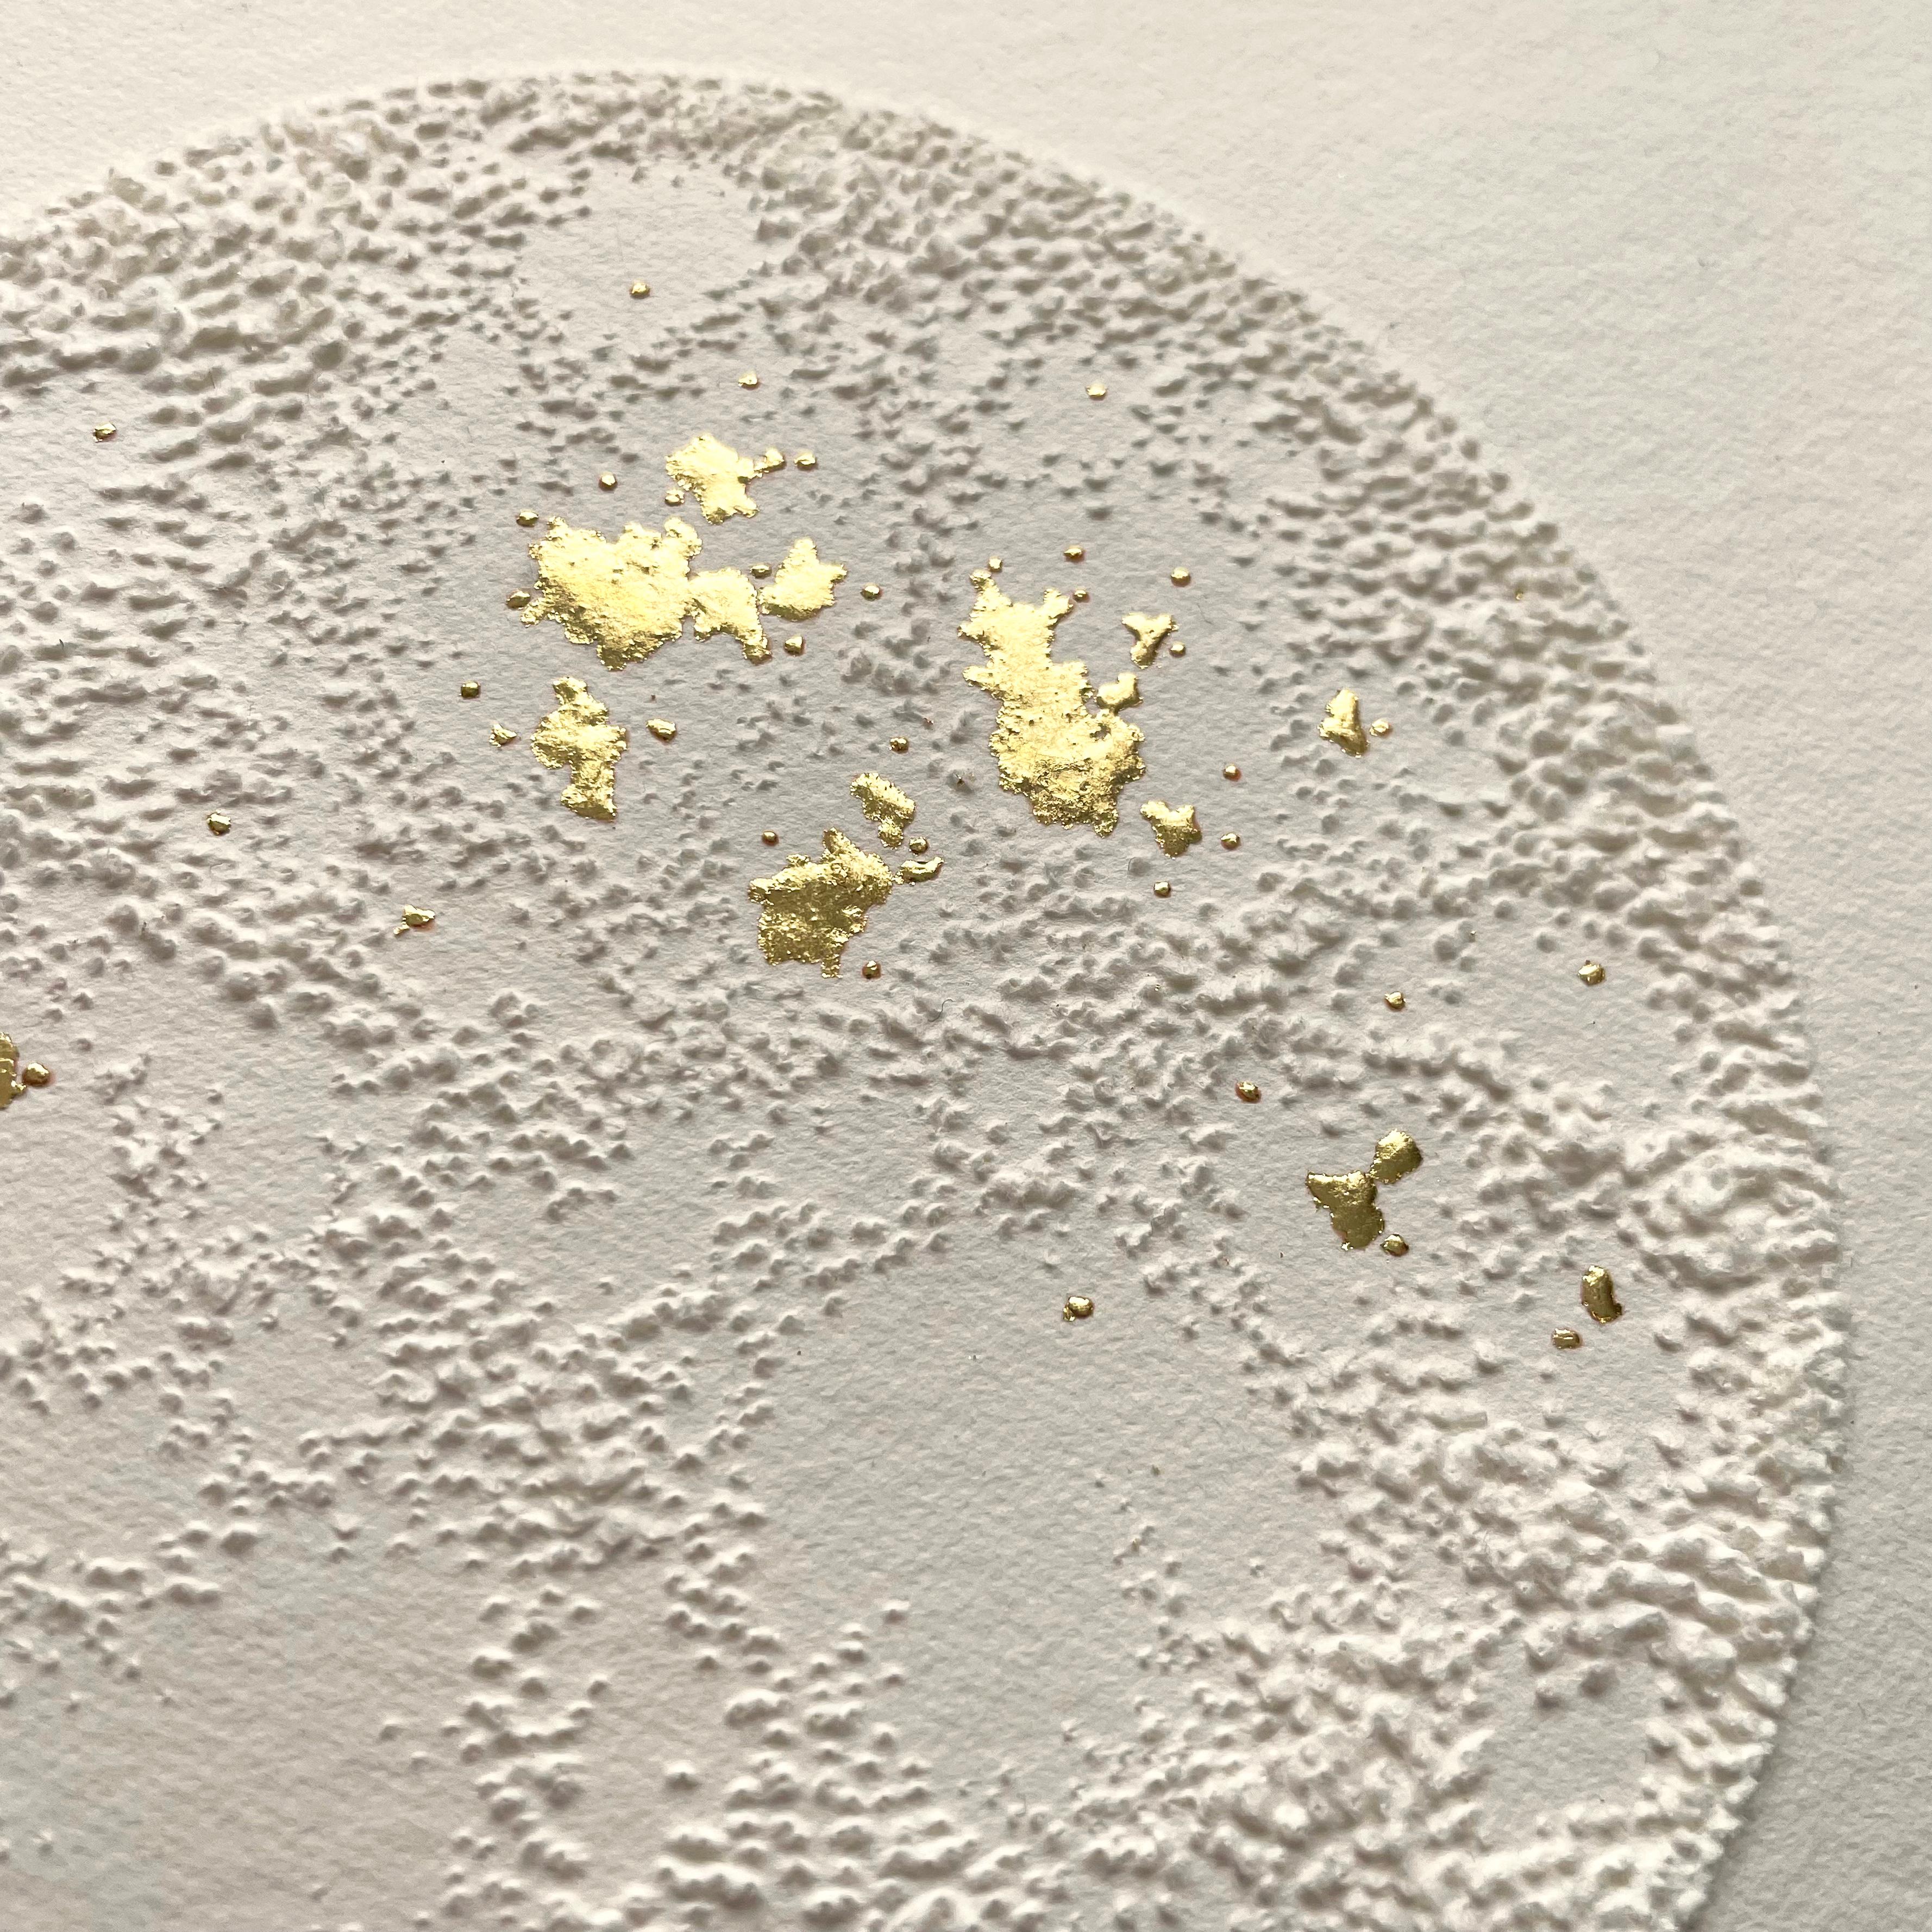 Moon 4- white 3D abstract circle with gold leaves and pulled paper fiber - Abstract Geometric Sculpture by Antonin Anzil